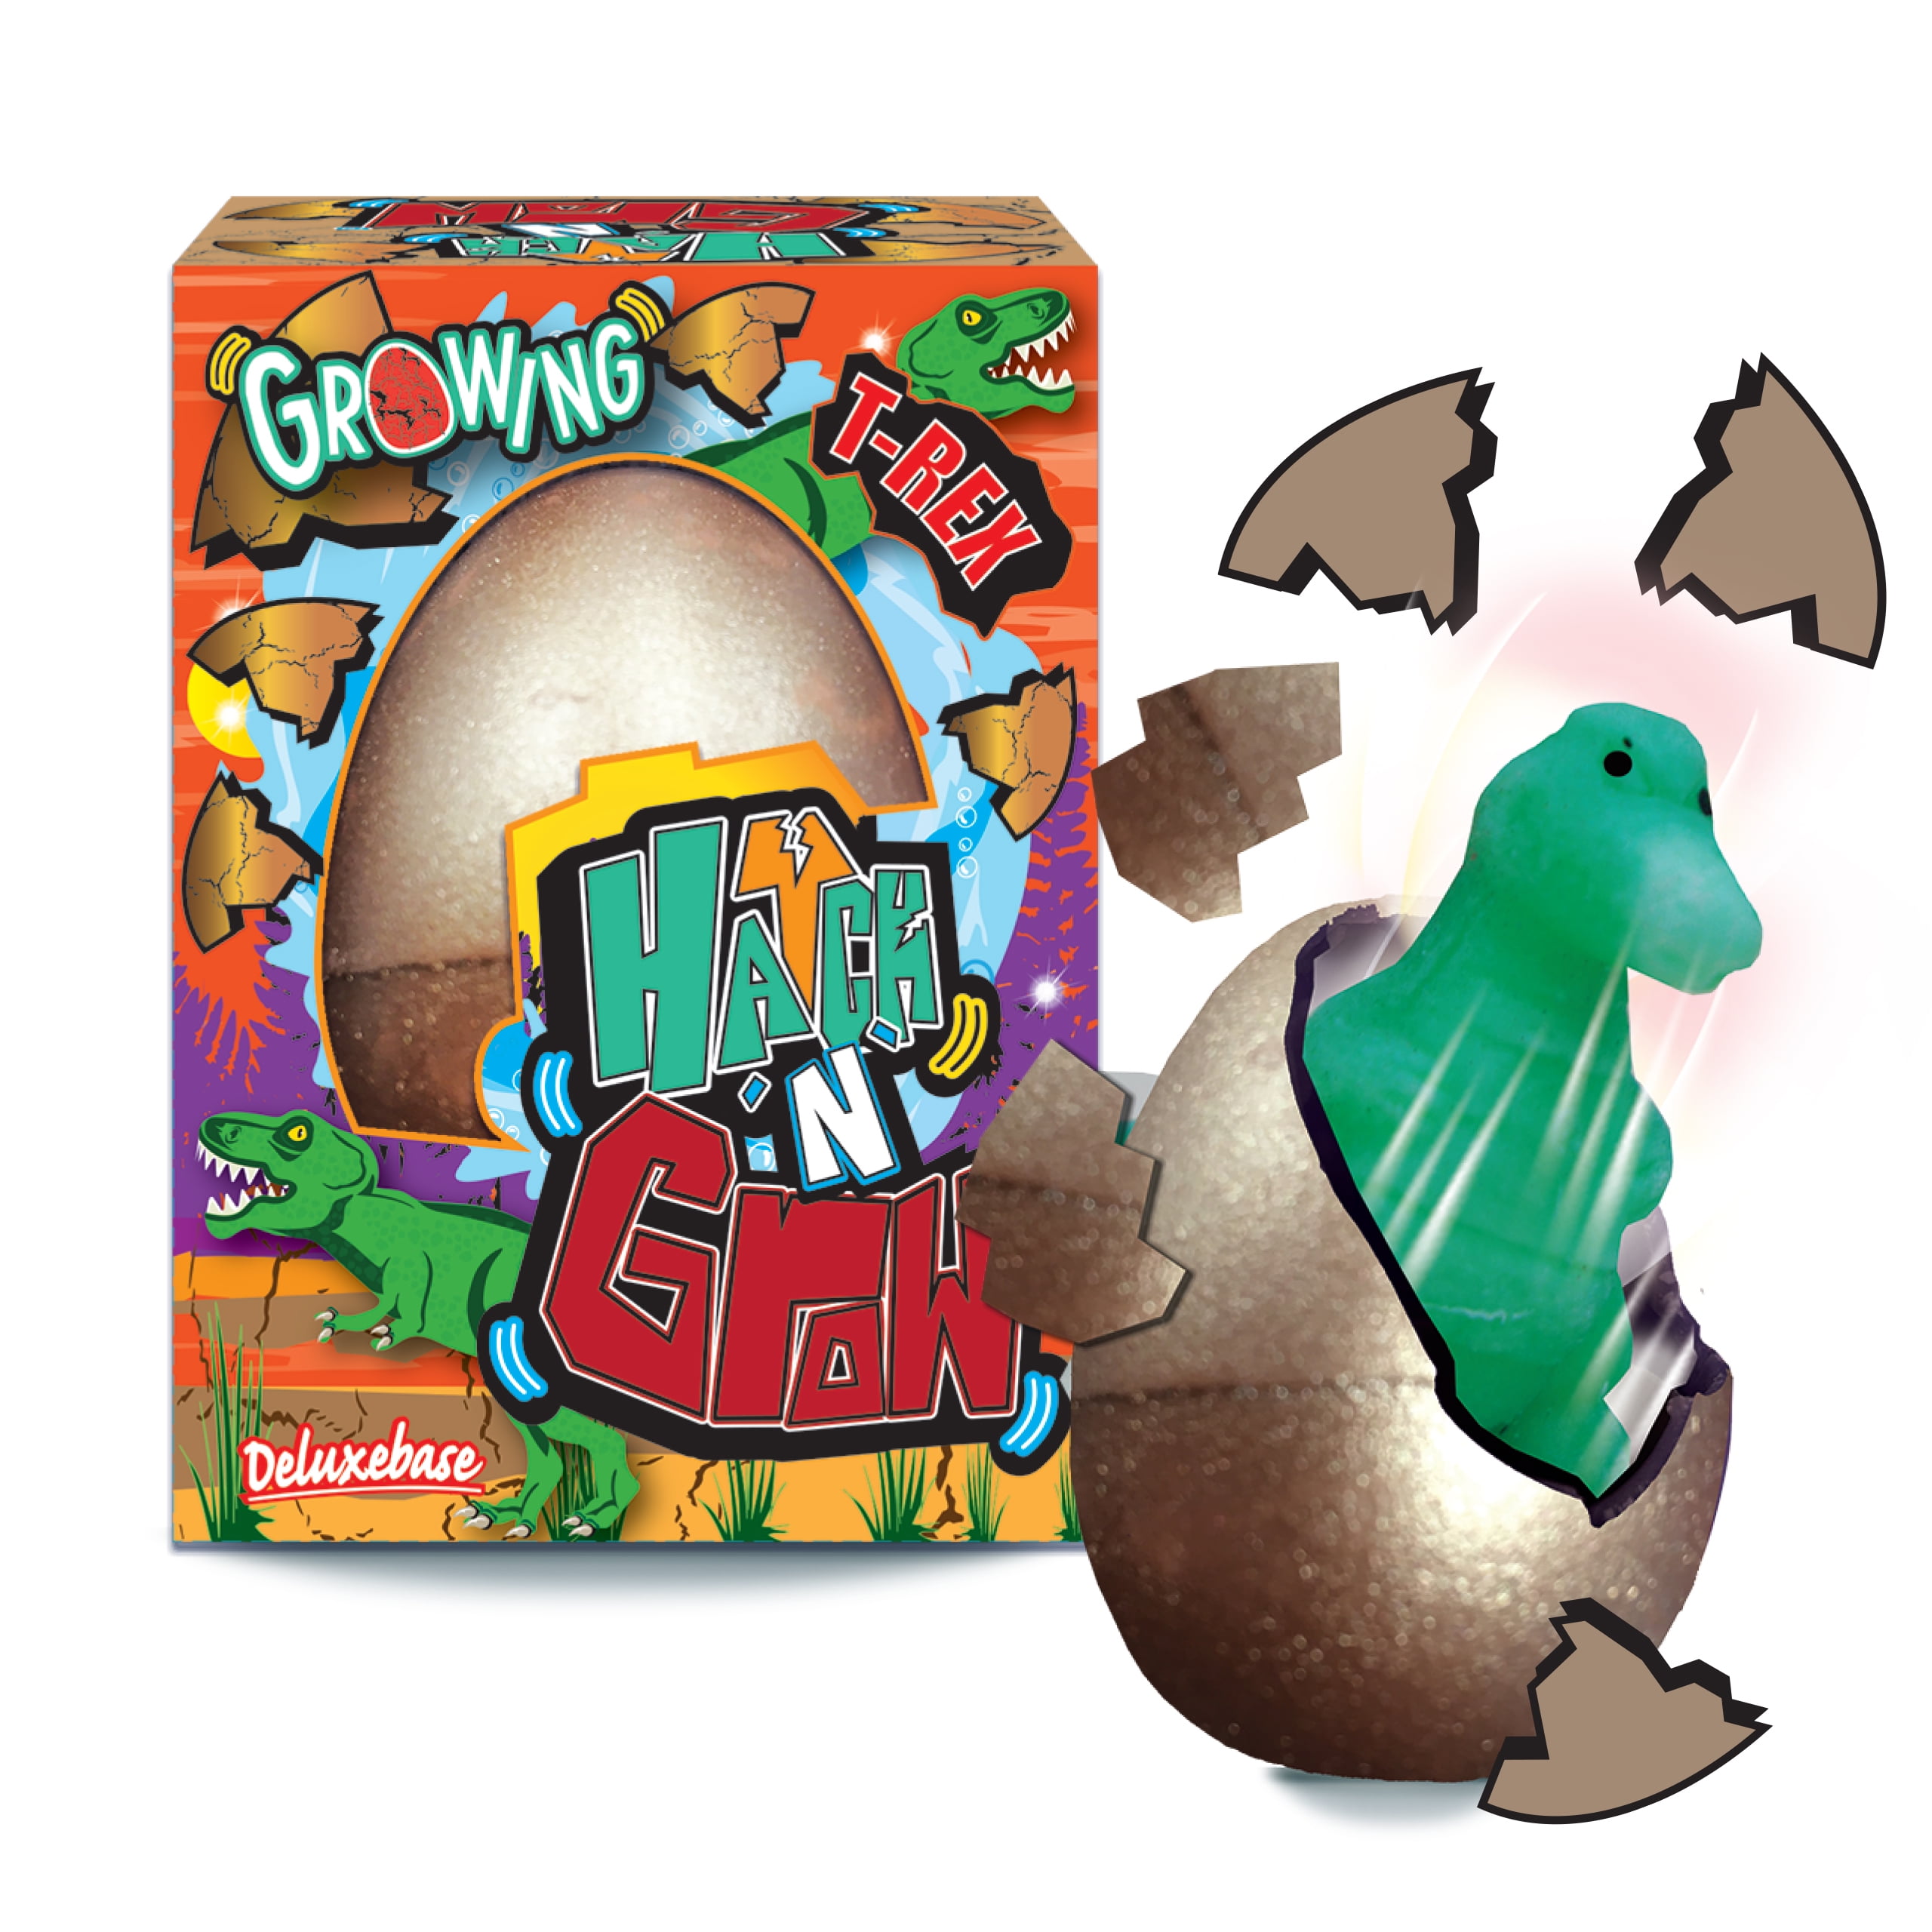 TRIASSIC TRIOPS - Racing Triops Kit, Contains Eggs, Food, Instructions and  Helpful Hints to Hatch and Grow Your Own Speedy Prehistoric Creatures, Fun